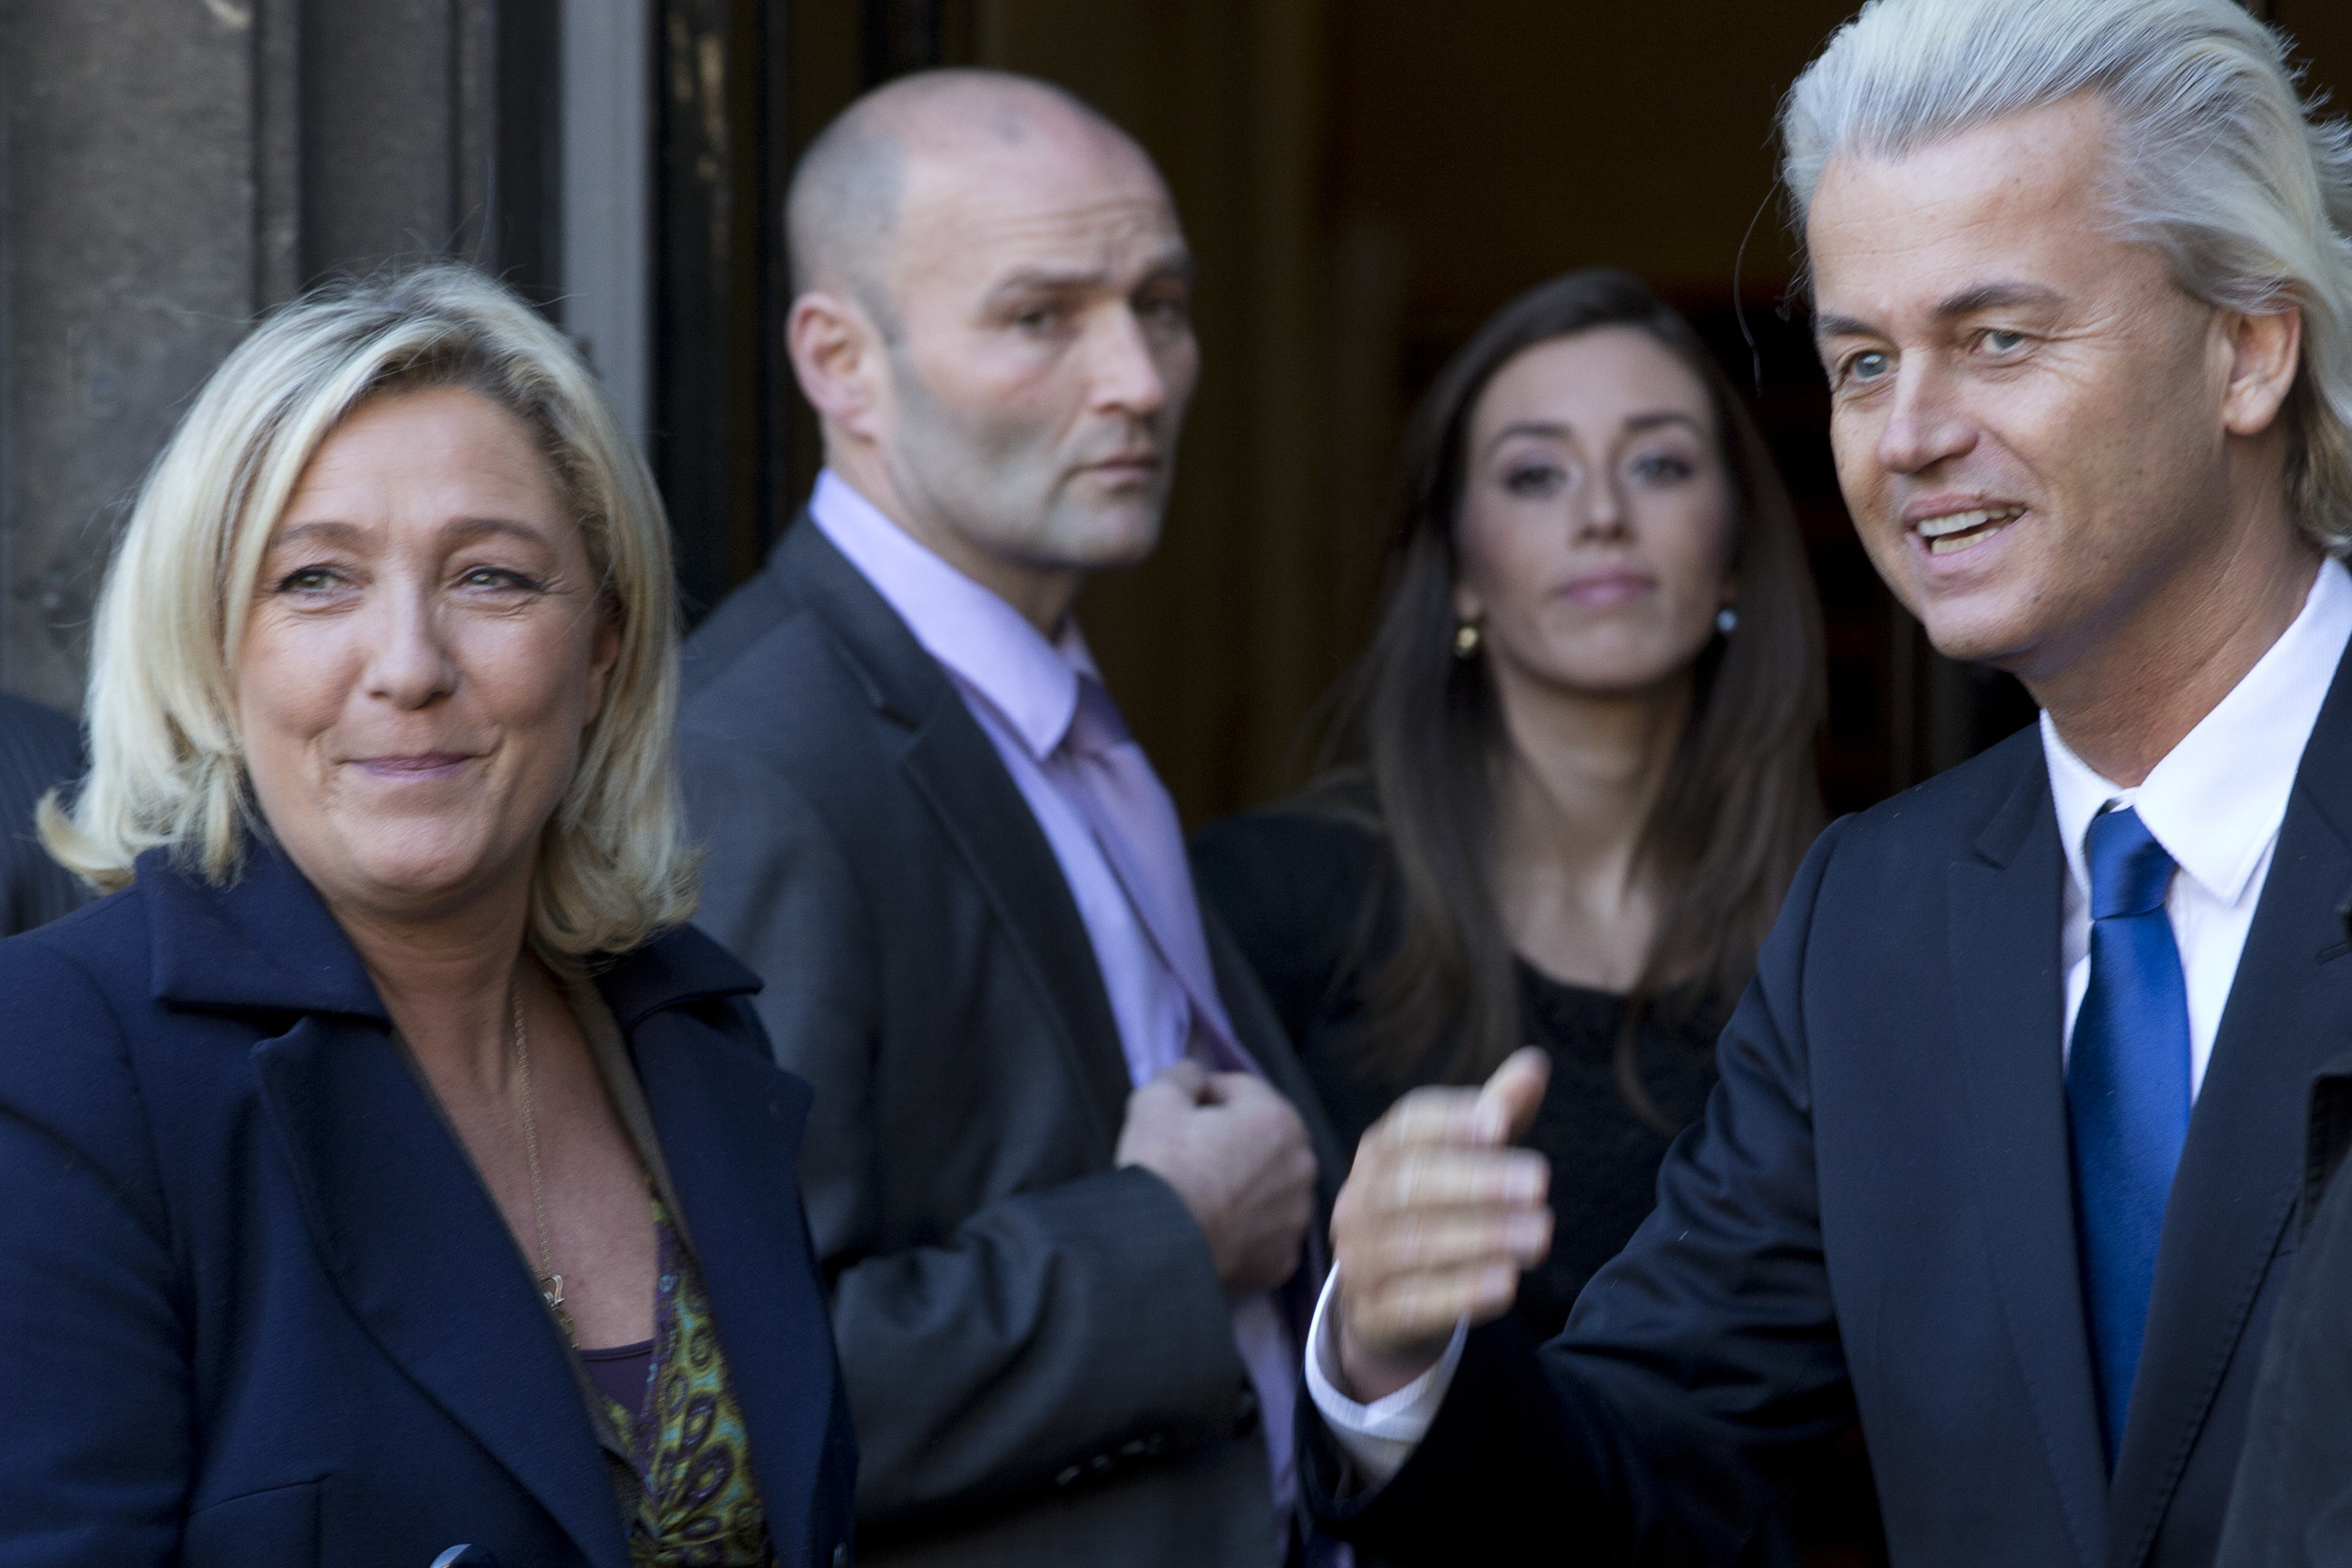 European right-wing politicians Dutchman Geert Wilders (right) and France's Marine Le Pen (left) pose for photographers in The Hague on Wednesday. Photo: AP